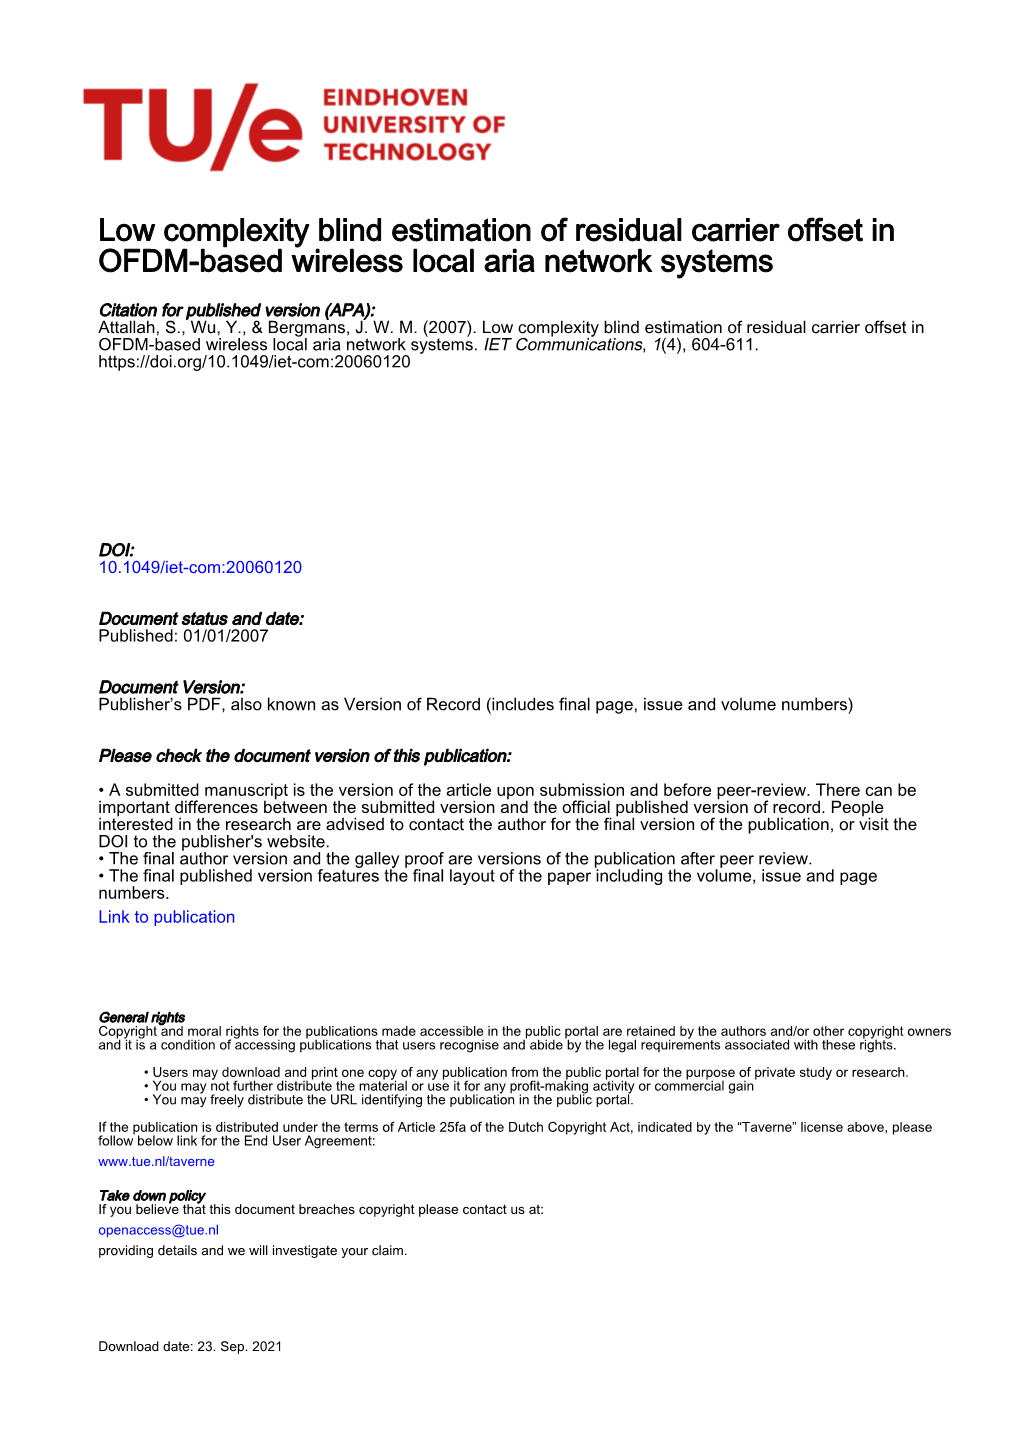 Low Complexity Blind Estimation of Residual Carrier Offset in OFDM-Based Wireless Local Aria Network Systems